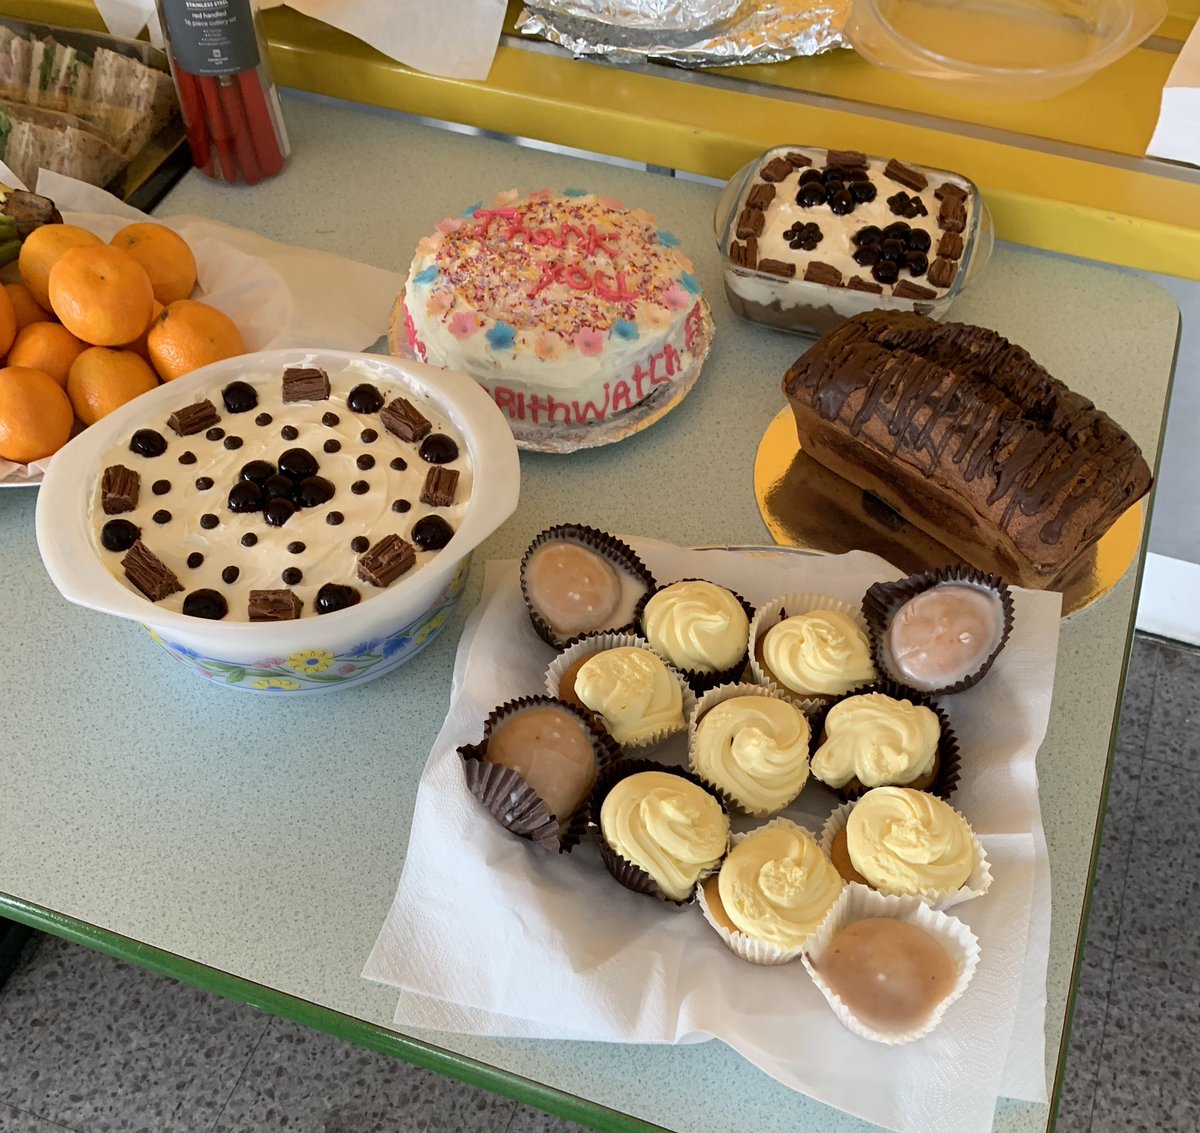 @HealthwatchEnf cake competition has commenced - calling our friends and supporters - where would you cast your vote? @McIntoshNichole @GeorgieAgass @NorthMidNHS @BEHMHTNHS @EnfieldCouncil @EnfieldCCG #SayingThankYou